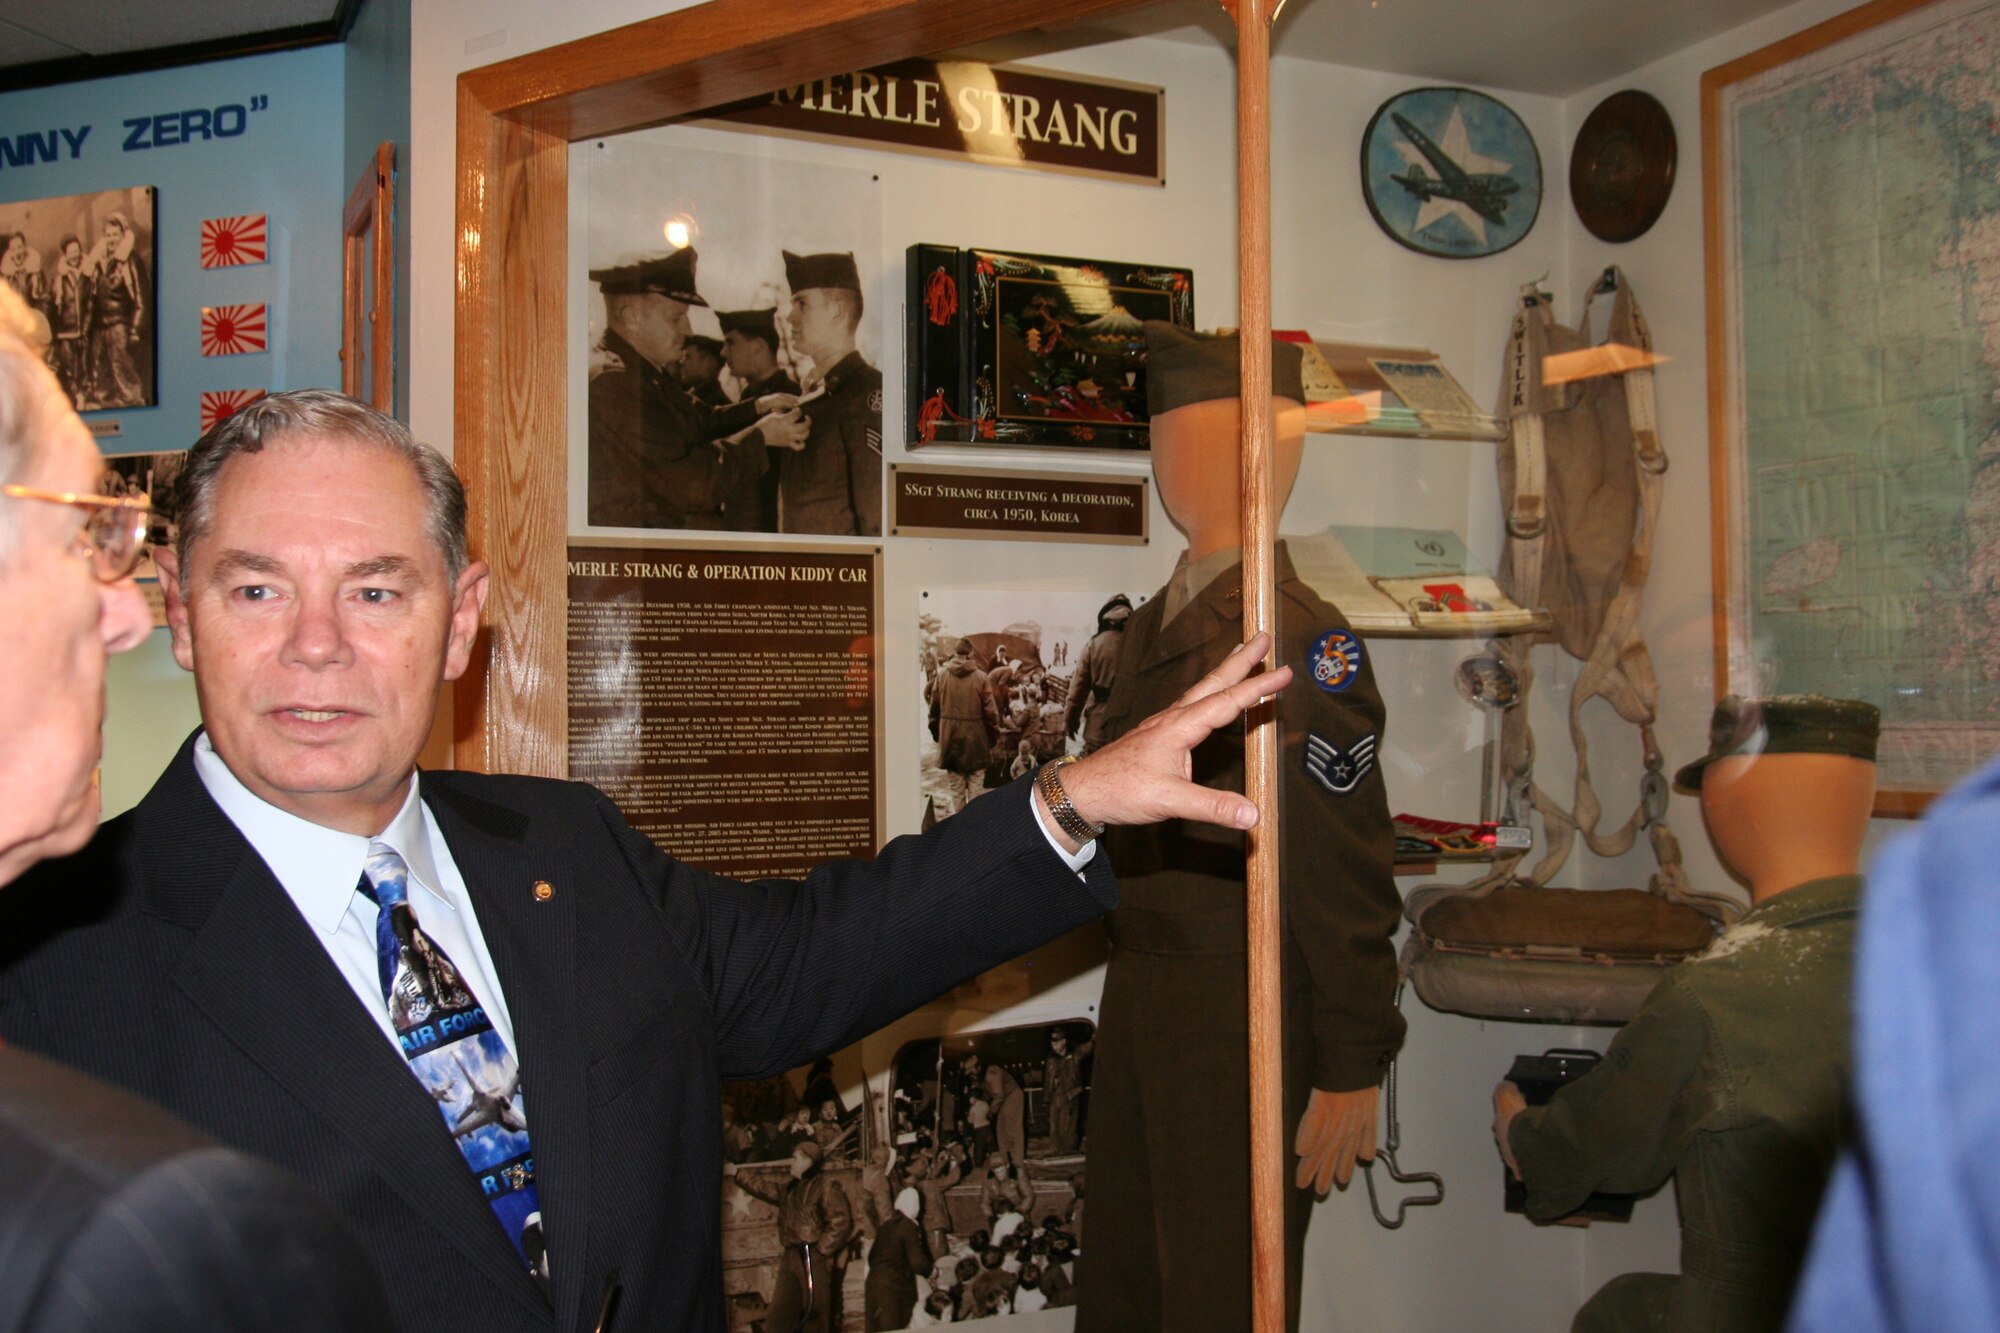 Bill Chivalette, curator for the Enlisted Heritage Hall, discusses the Staff Sgt. Merle Y. Strang exhibit during a dedication ceremony Nov. 5.  The exhibit features Strang’s uniform and information about his efforts in 1950 to rescue 6,000 orphaned and homeless children in Seoul, where he served as a chaplain assistant.  (Air Force photo by Kelly Deichert)